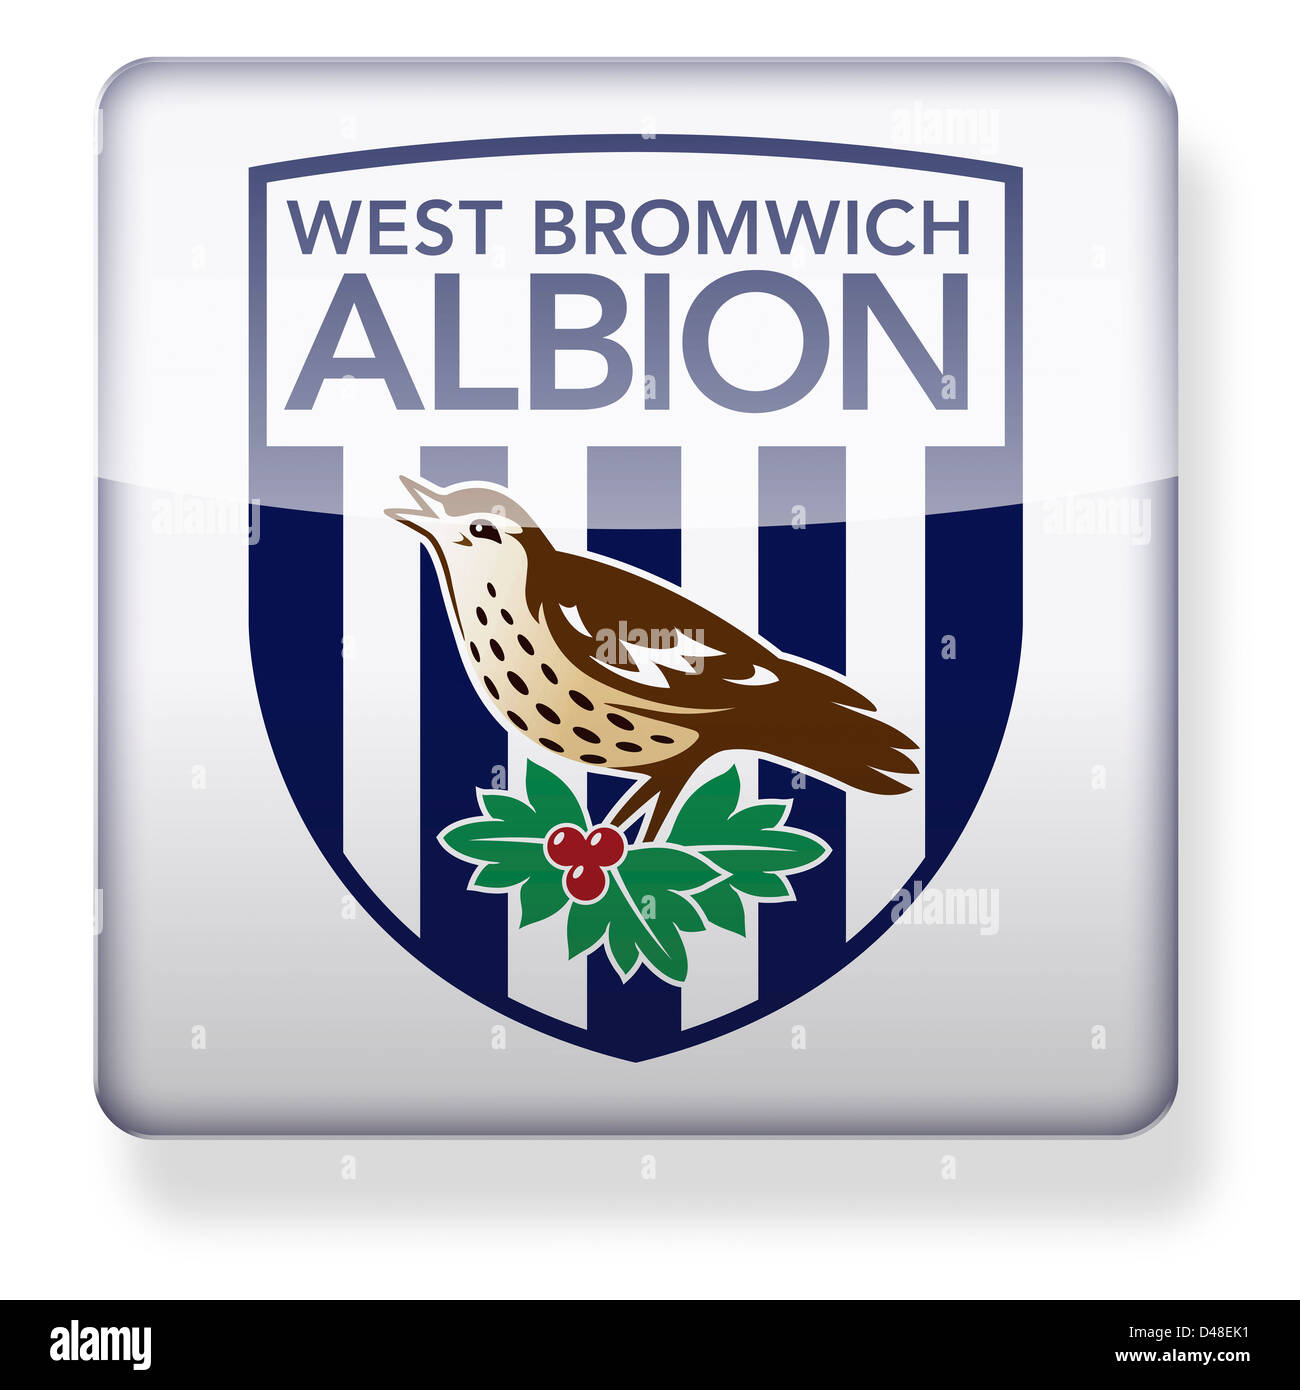 West Bromwich Albion football club logo as an app icon. Clipping path included. Stock Photo